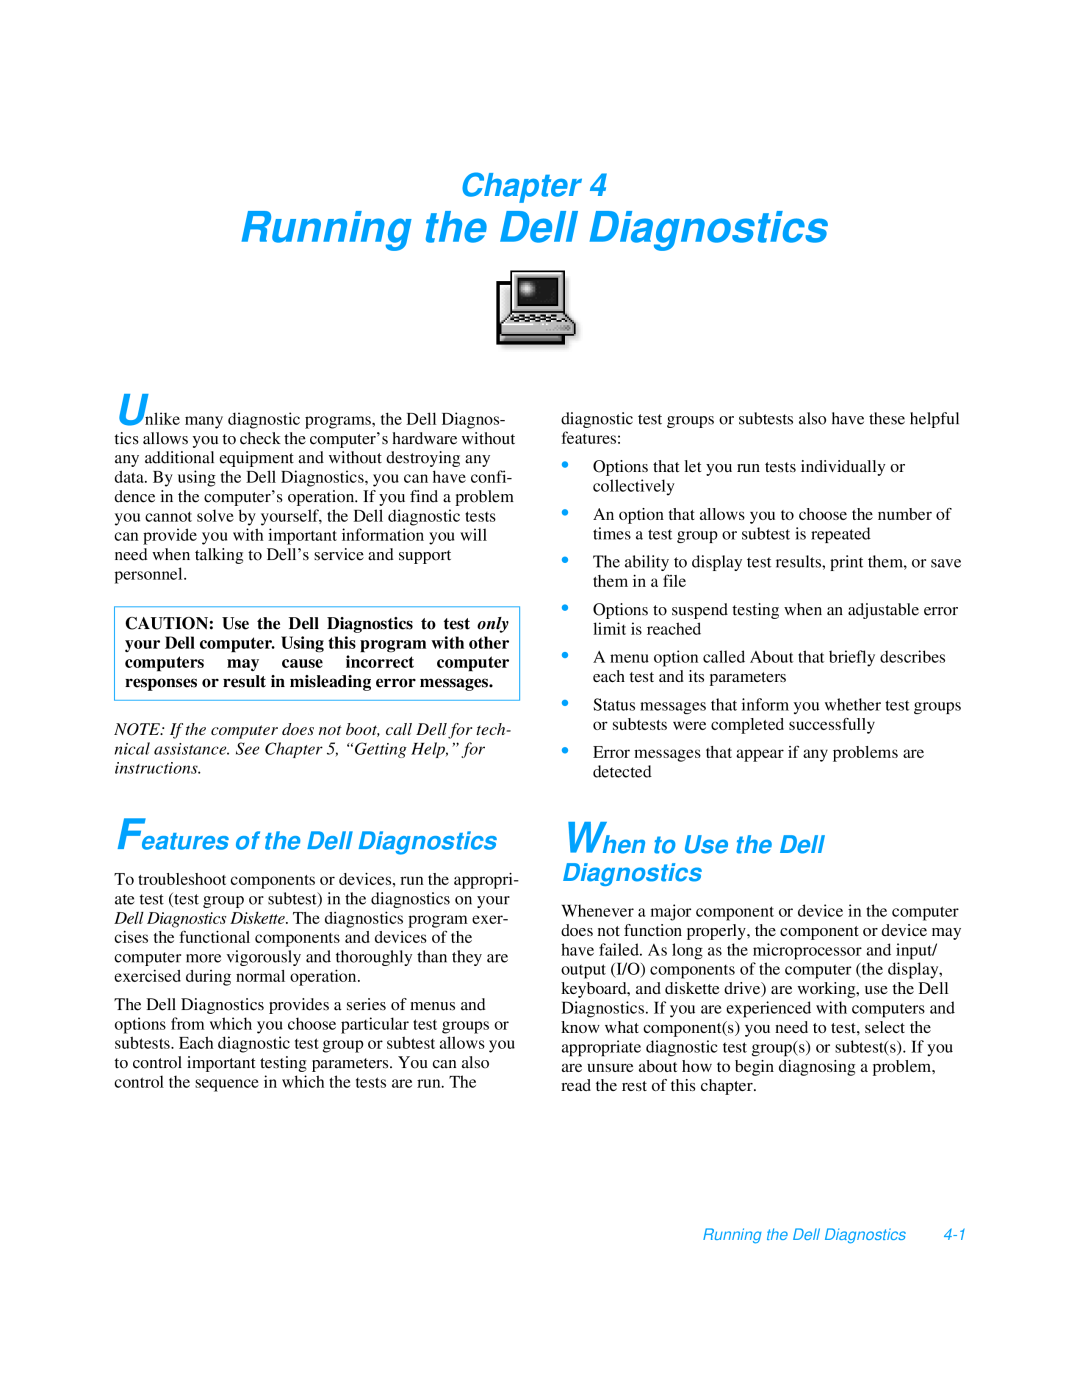 Dell 3000 manual Running the Dell Diagnostics, Features of the Dell Diagnostics, When to Use the Dell Diagnostics, Chapter 